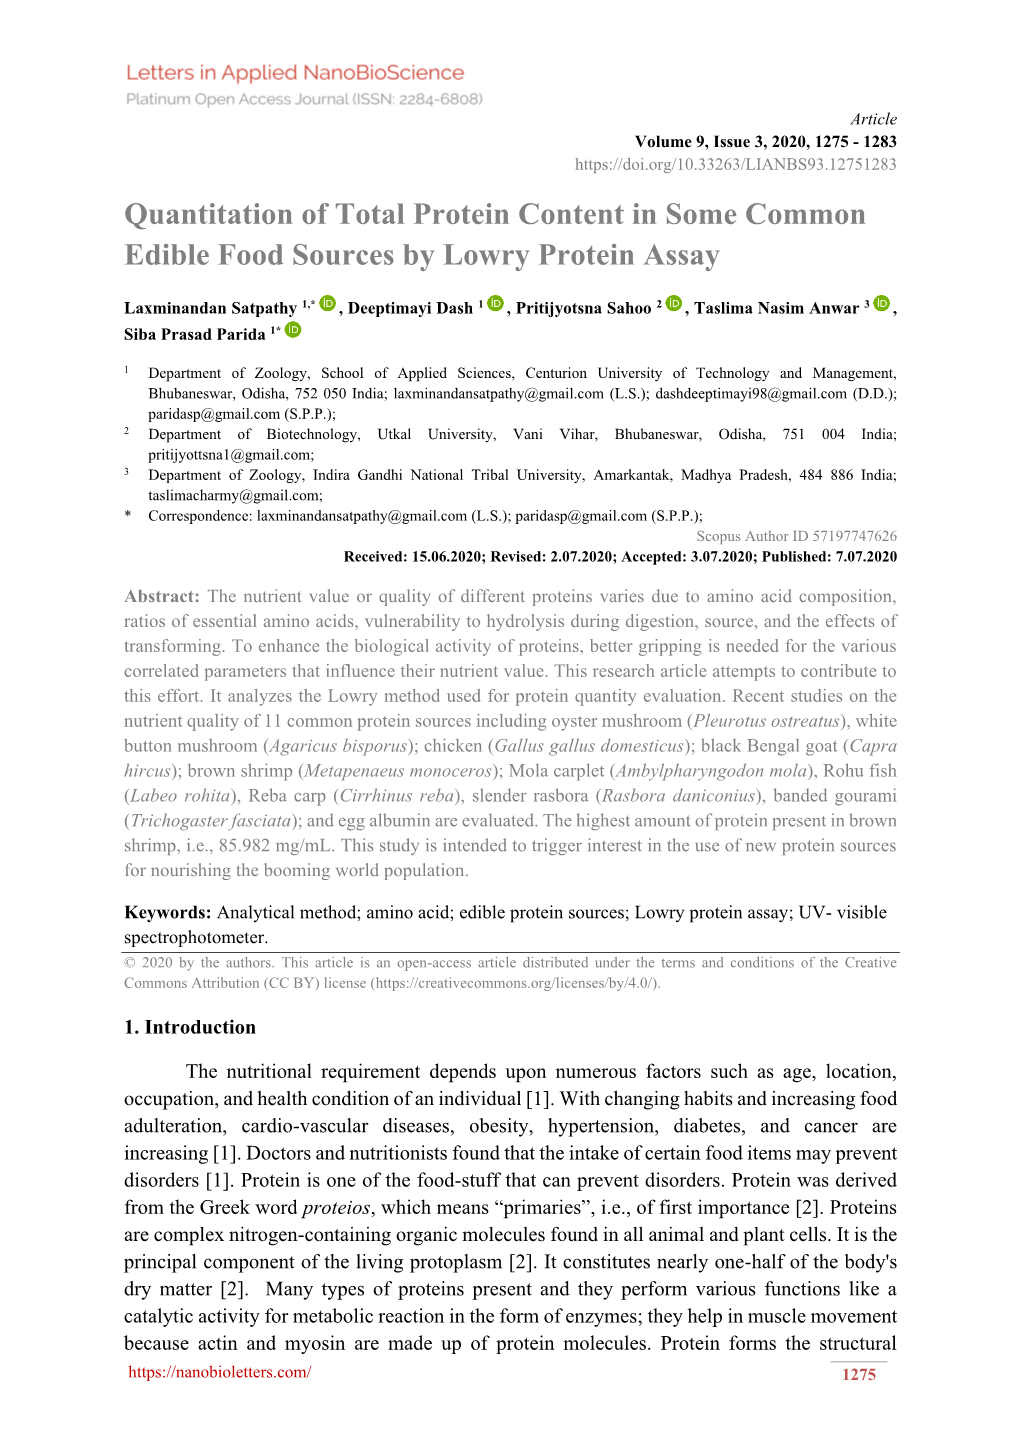 Quantitation of Total Protein Content in Some Common Edible Food Sources by Lowry Protein Assay